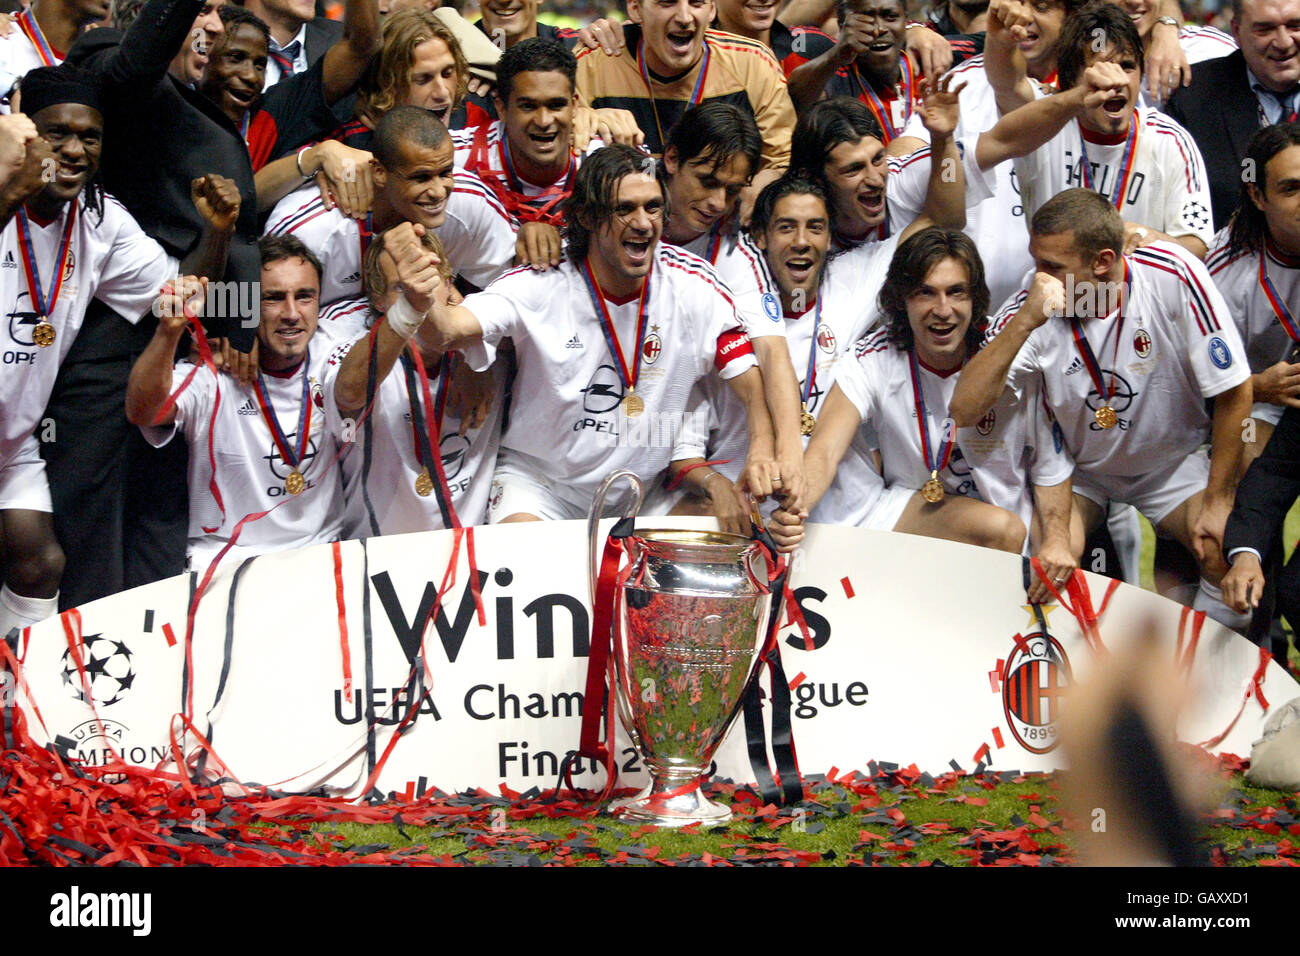 Soccer - UEFA Champions League - Final - Juventus v AC Milan. AC Milan players get their hands on the UEFA Champions League trophy as they celebrate their win against Juventus (c) captain Paolo Maldini Stock Photo